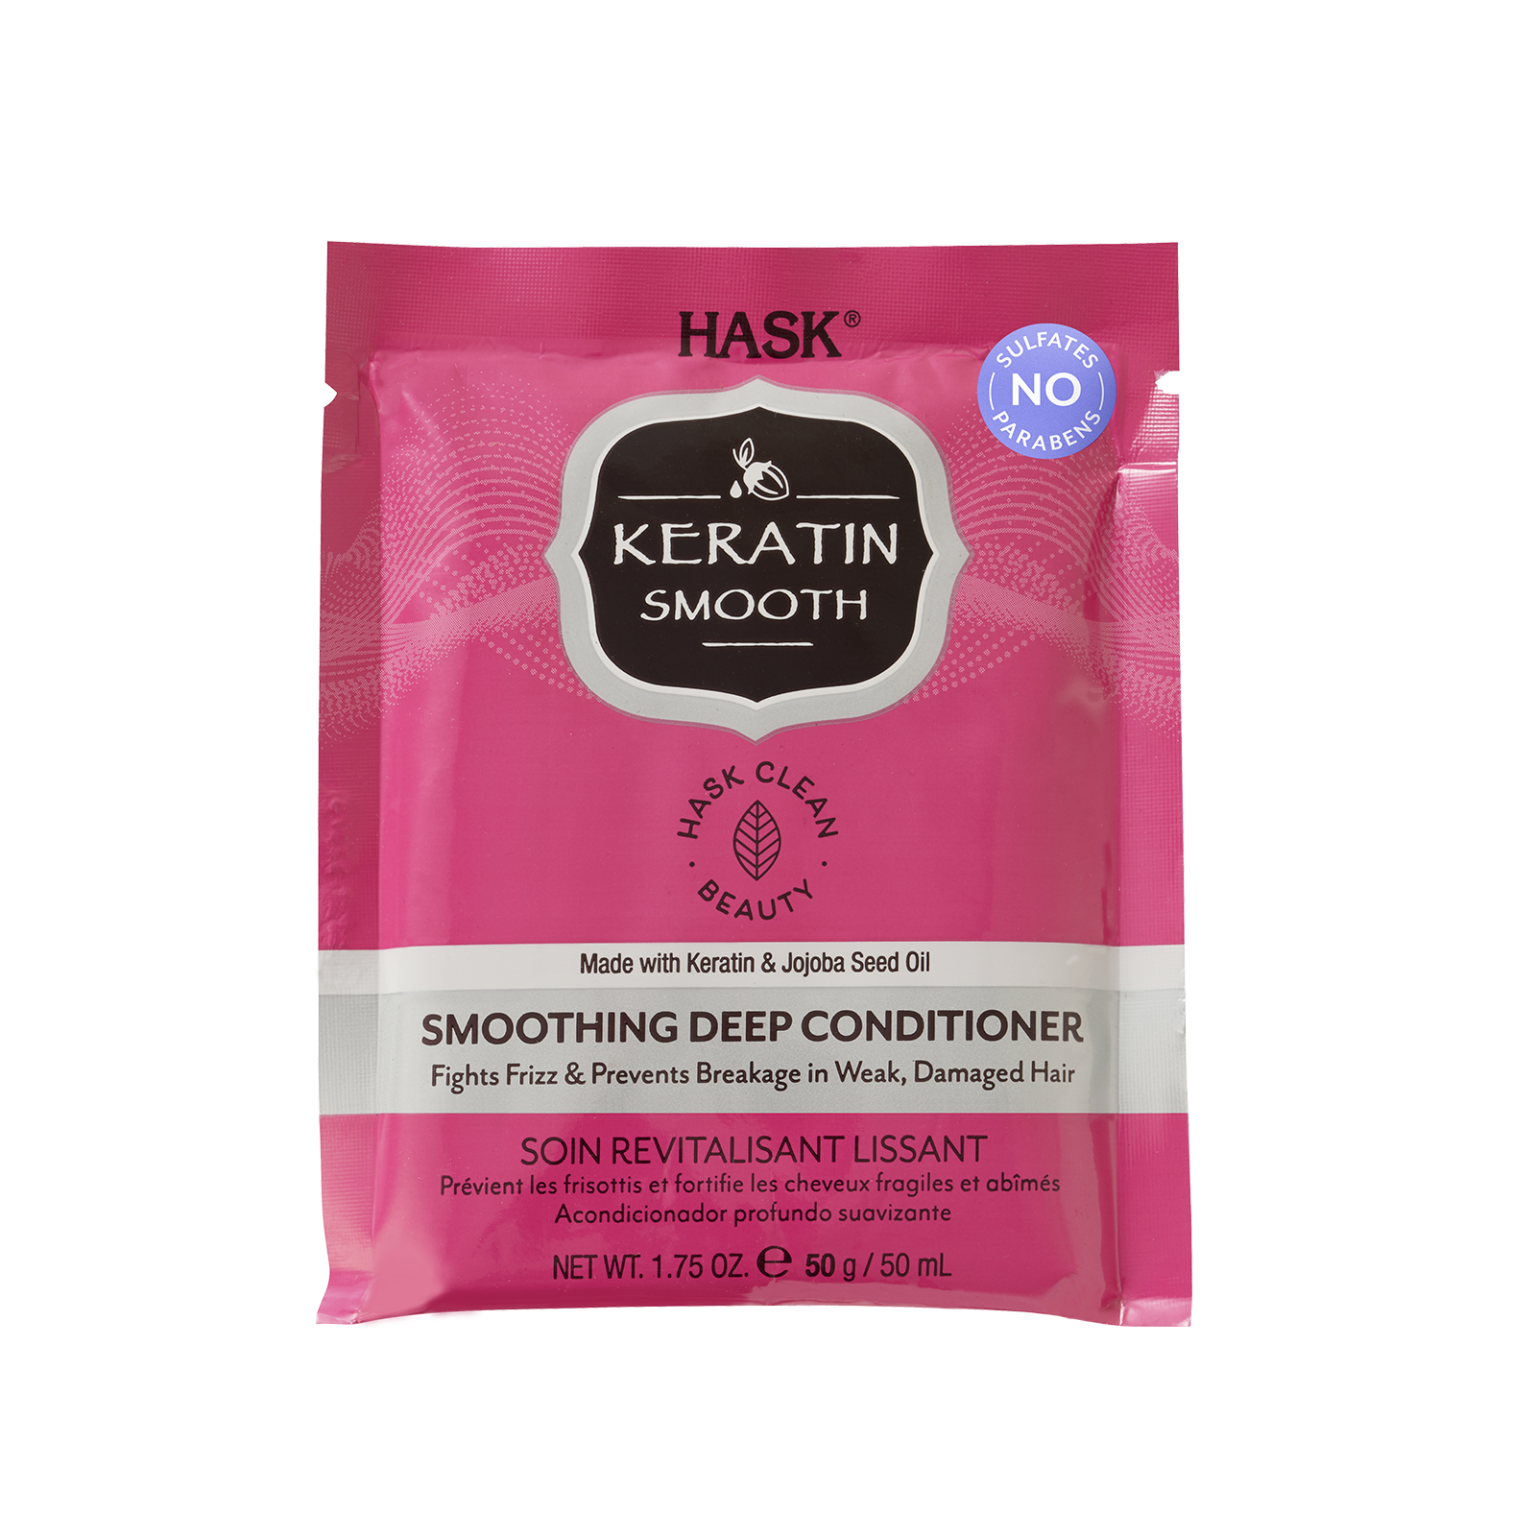 HASK Keratin Protein Smoothing Deep Conditioner